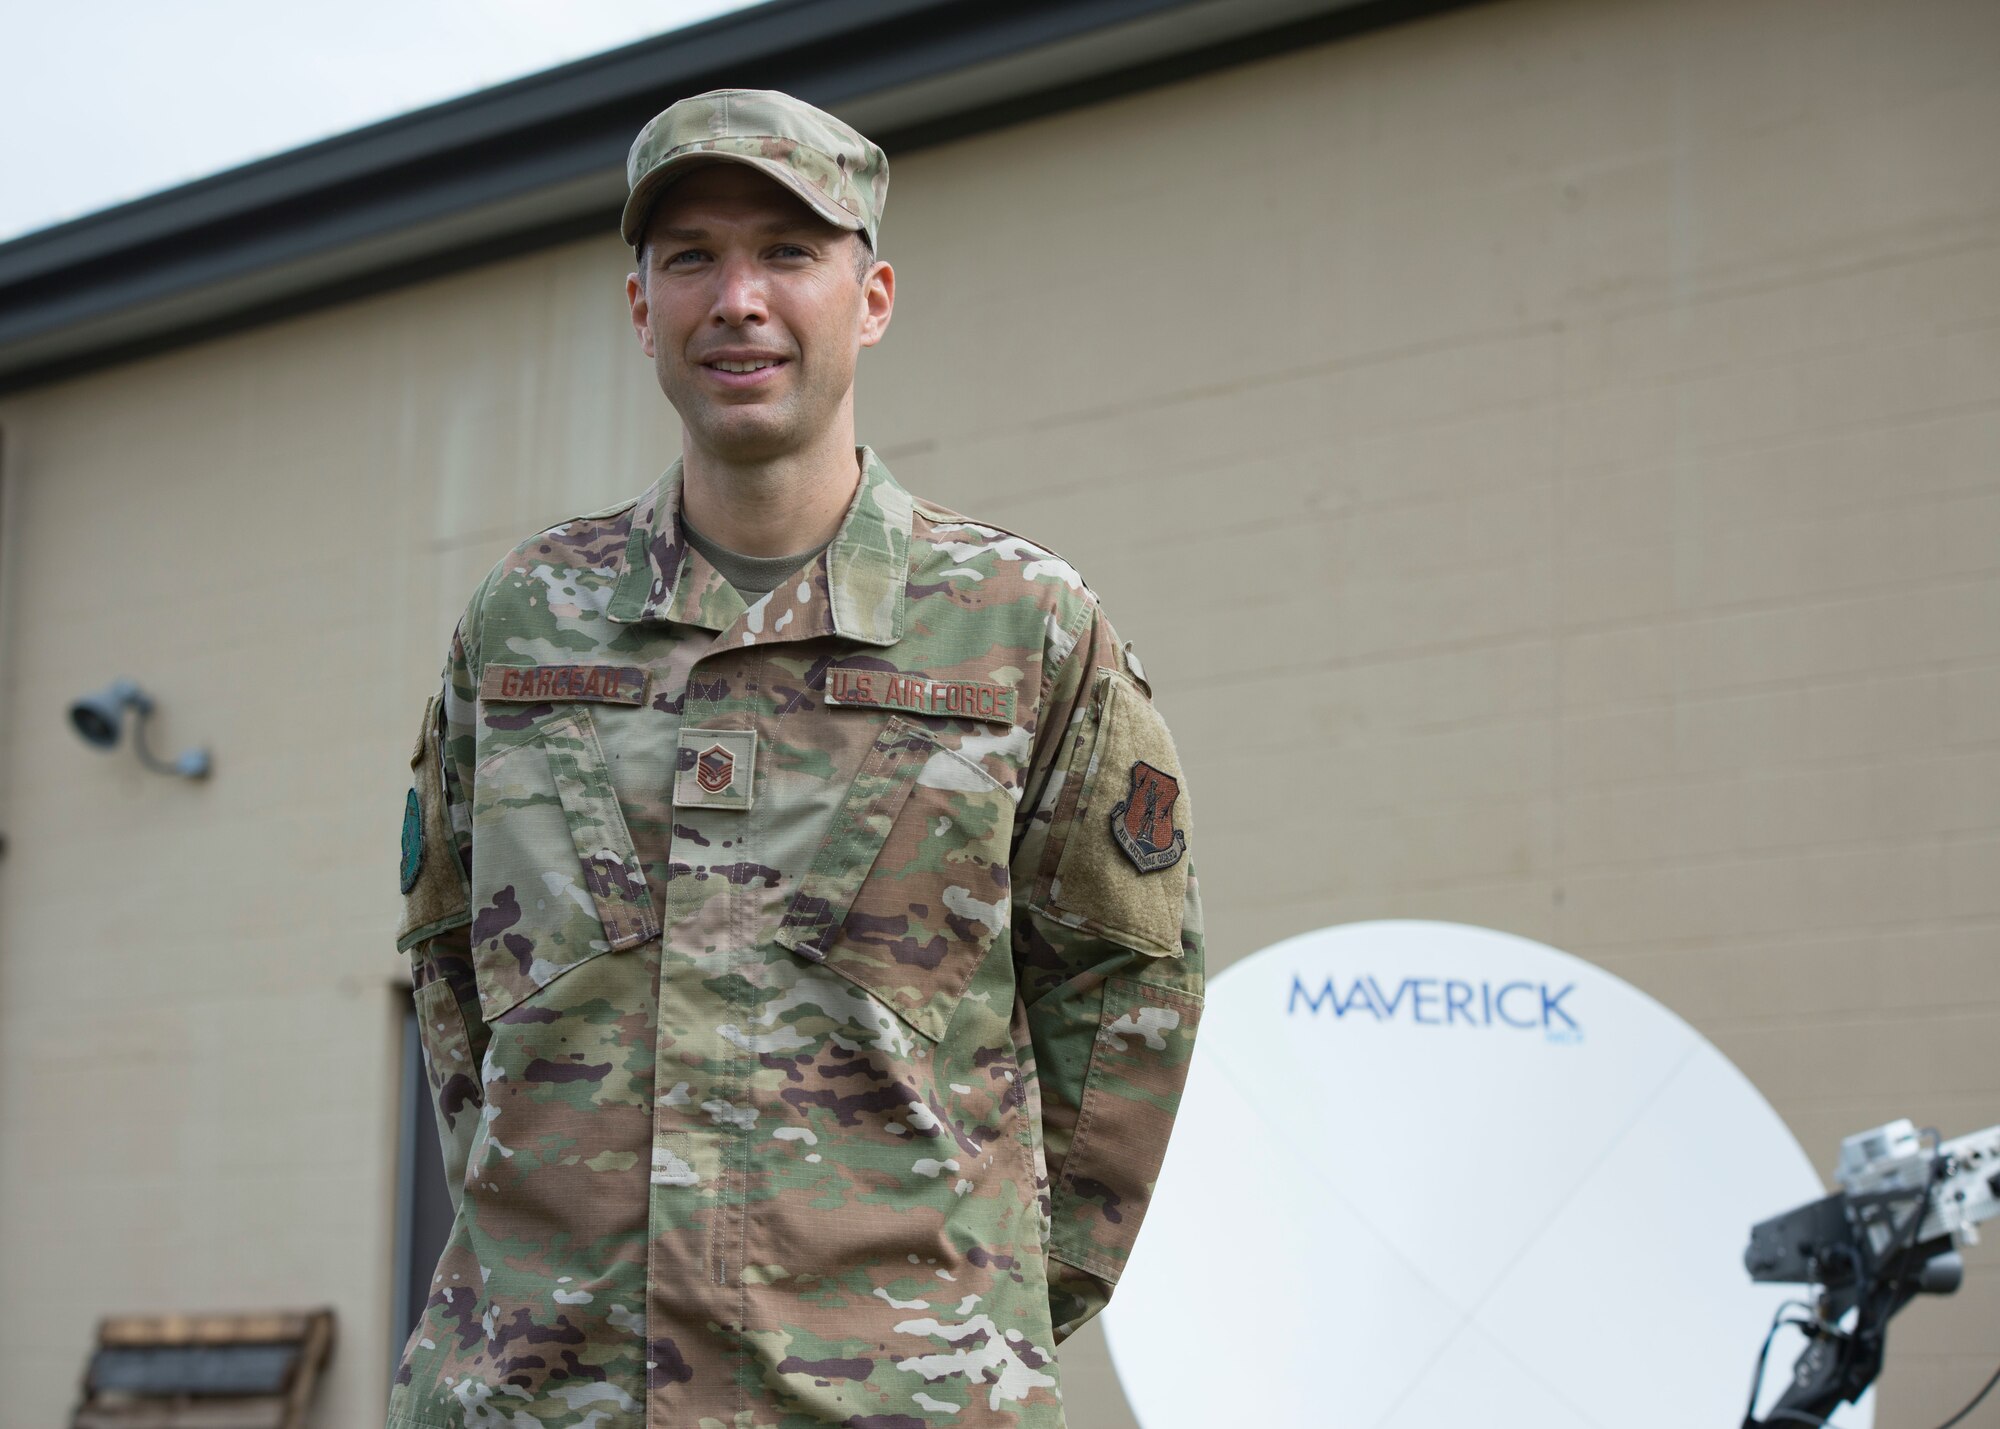 Air Force Master Sgt. Seth Garceau, a member of the 103rd Communications Squadron, stands in front of a satellite dish that he set up, Sept. 30, 2020 at Bradley Air National Guard Base, Conn. The set up was part of an expansive communications project. (U.S. Air National Guard photo by Tech. Sgt. Tamara R. Dabney)